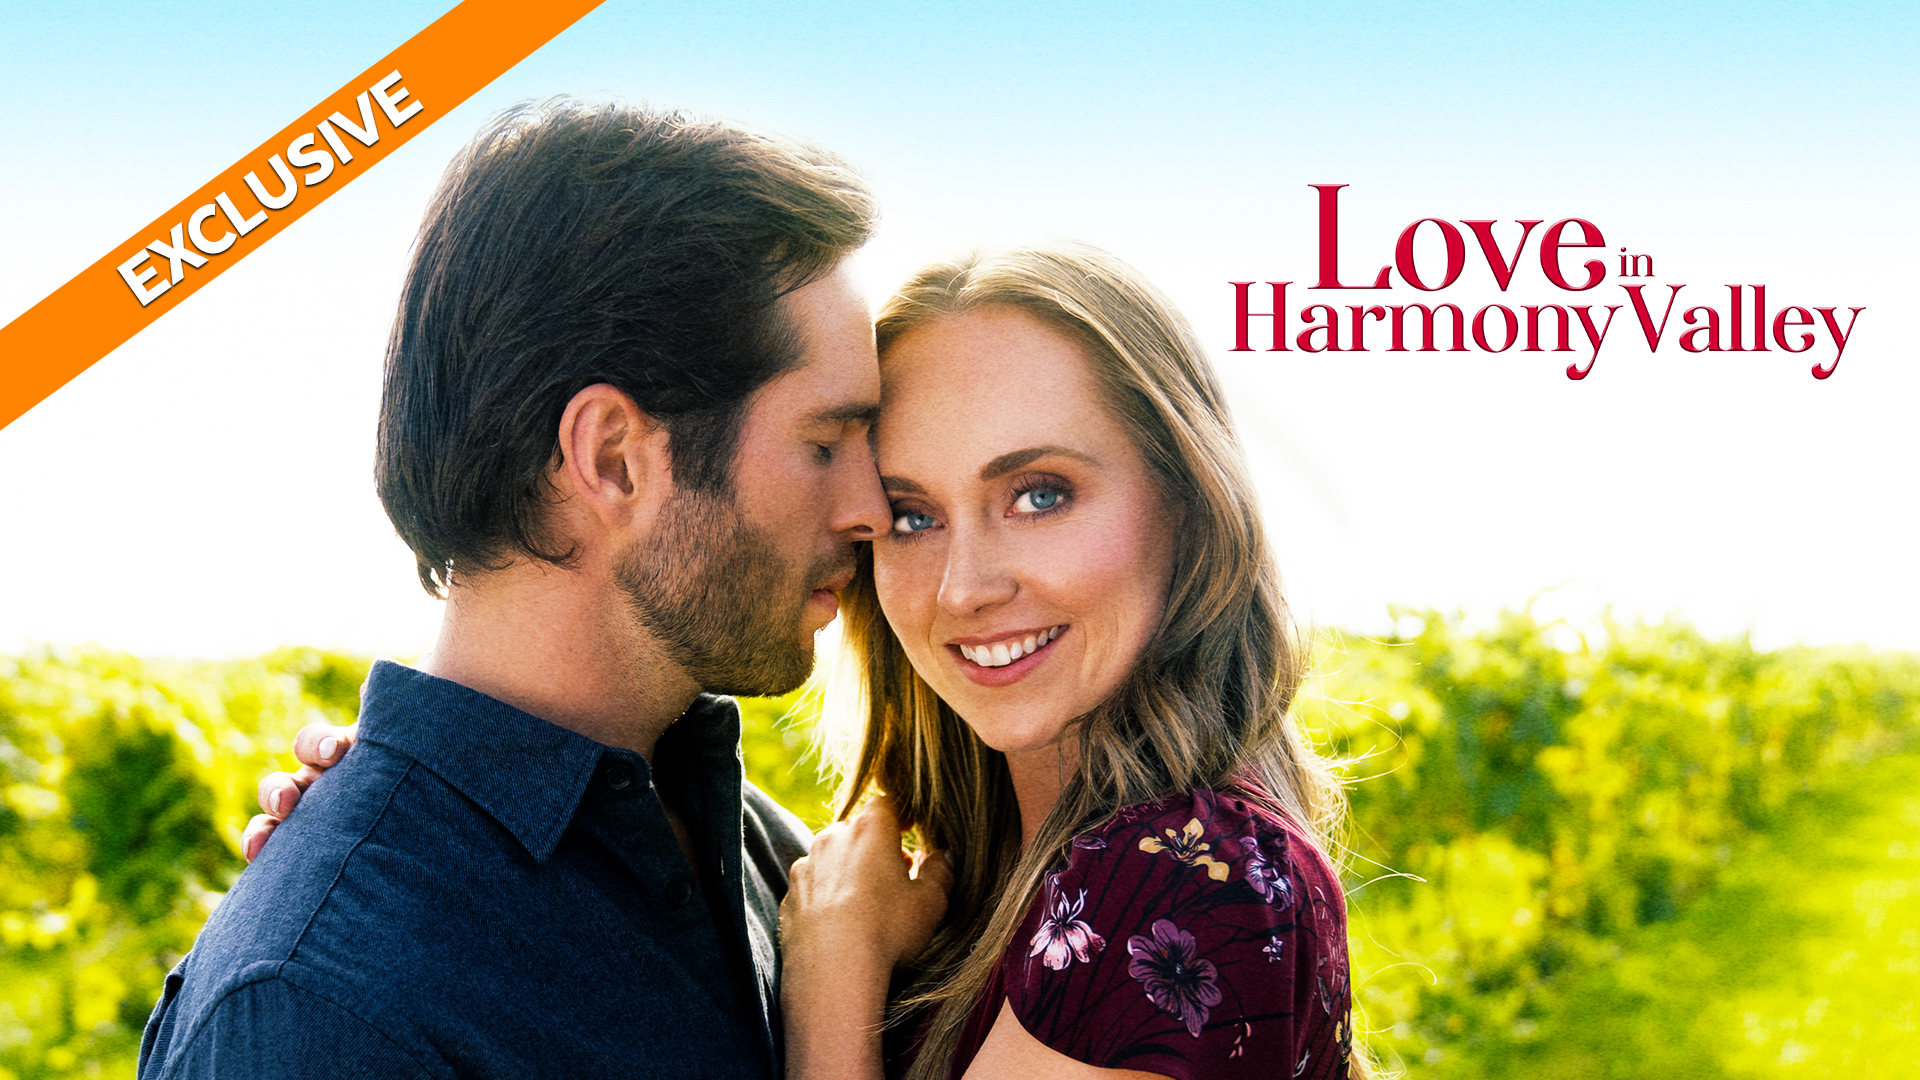 watch love in harmony valley